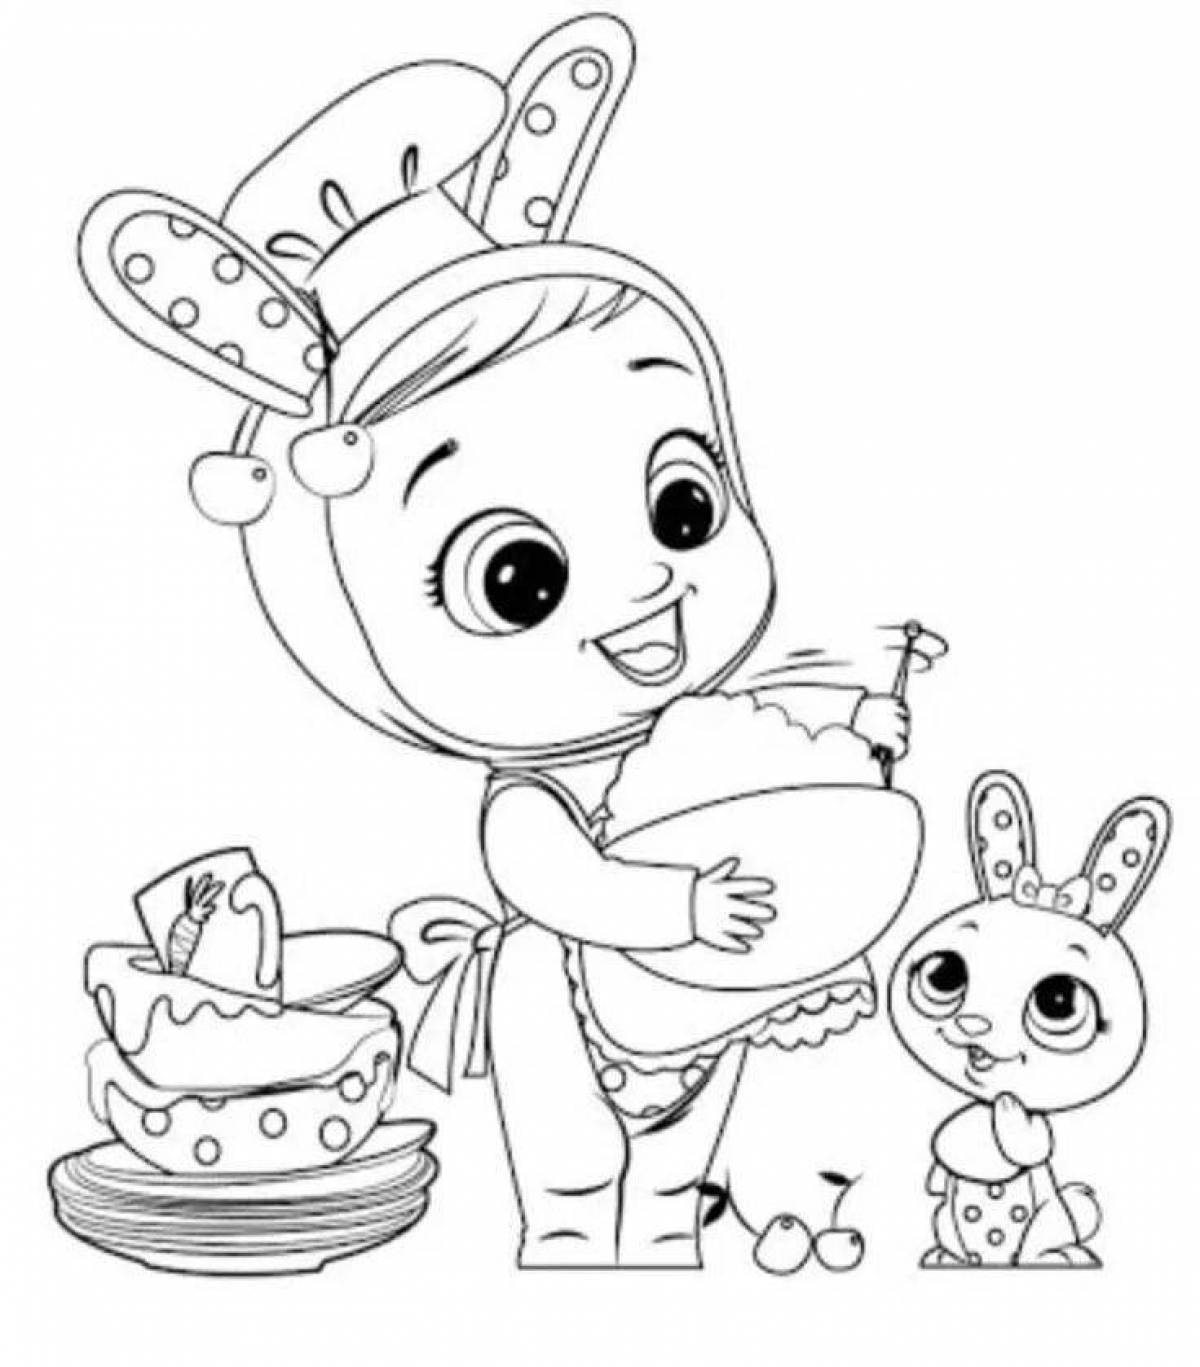 Glitter crybaby coloring book